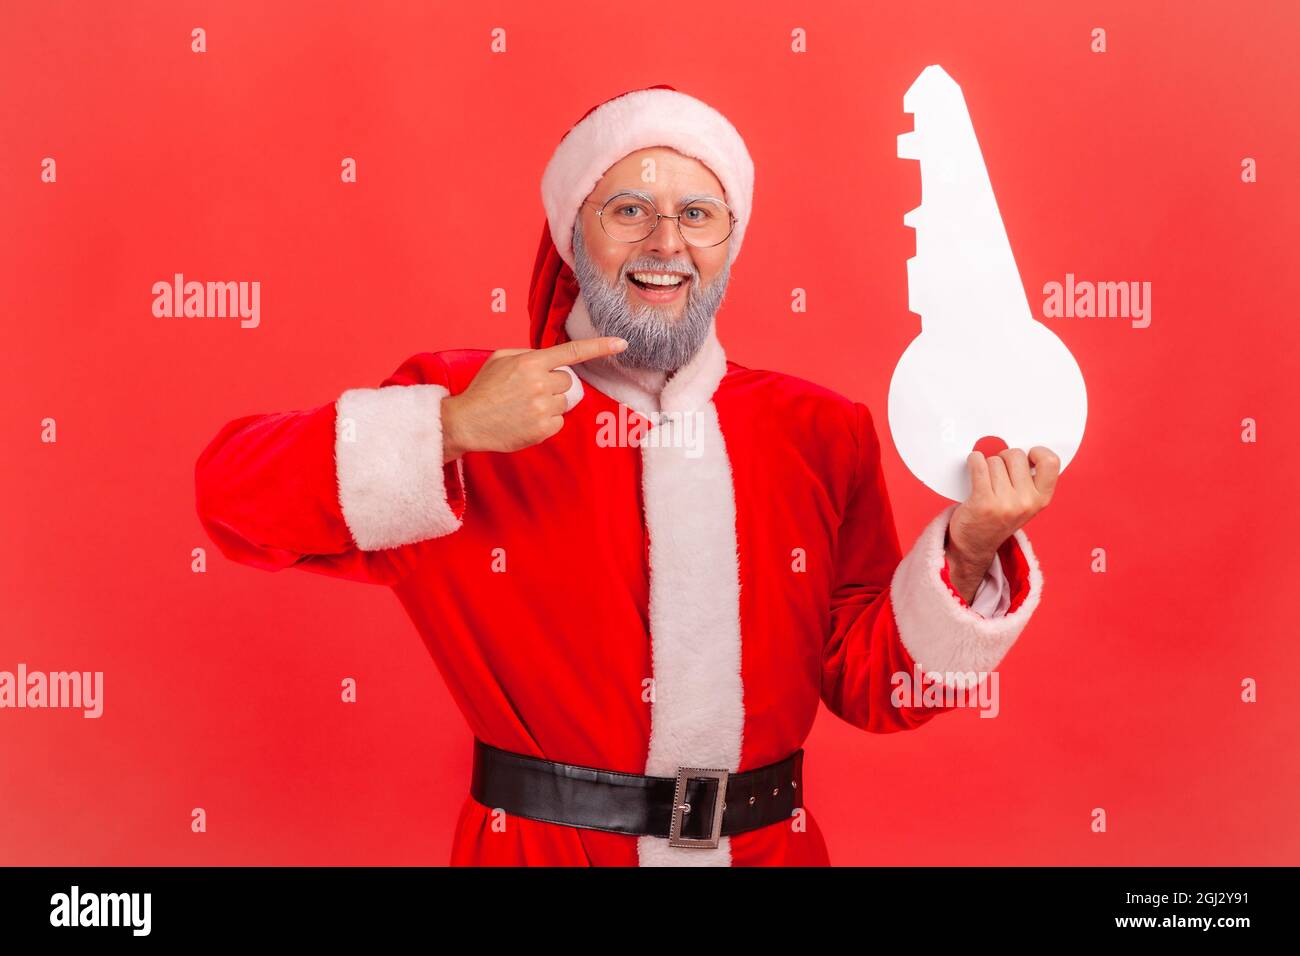 Portrait of smiling elderly man with gray beard wearing santa claus costume standing pointing to paper key, recommend agency for buying apartment. Ind Stock Photo